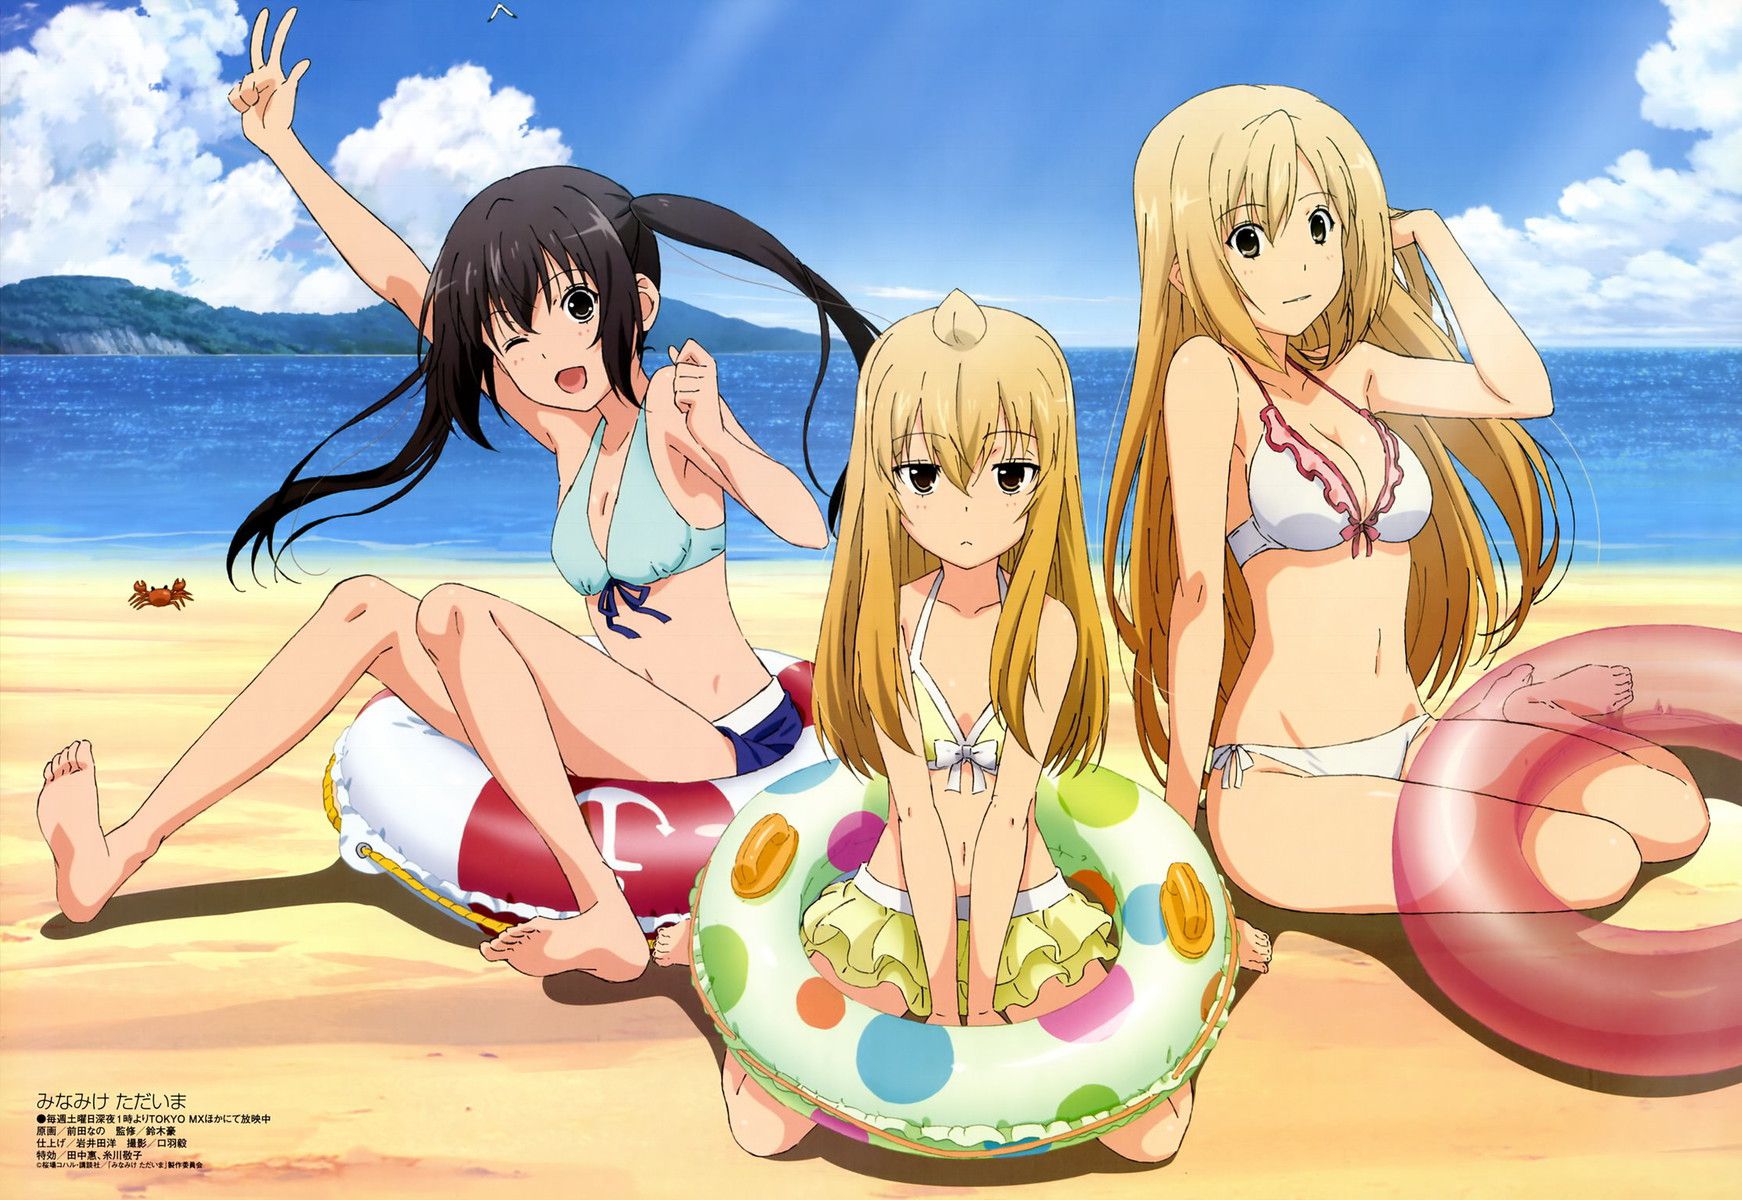 The official image of beautiful girl anime is too cute erotic wwwwwww 4